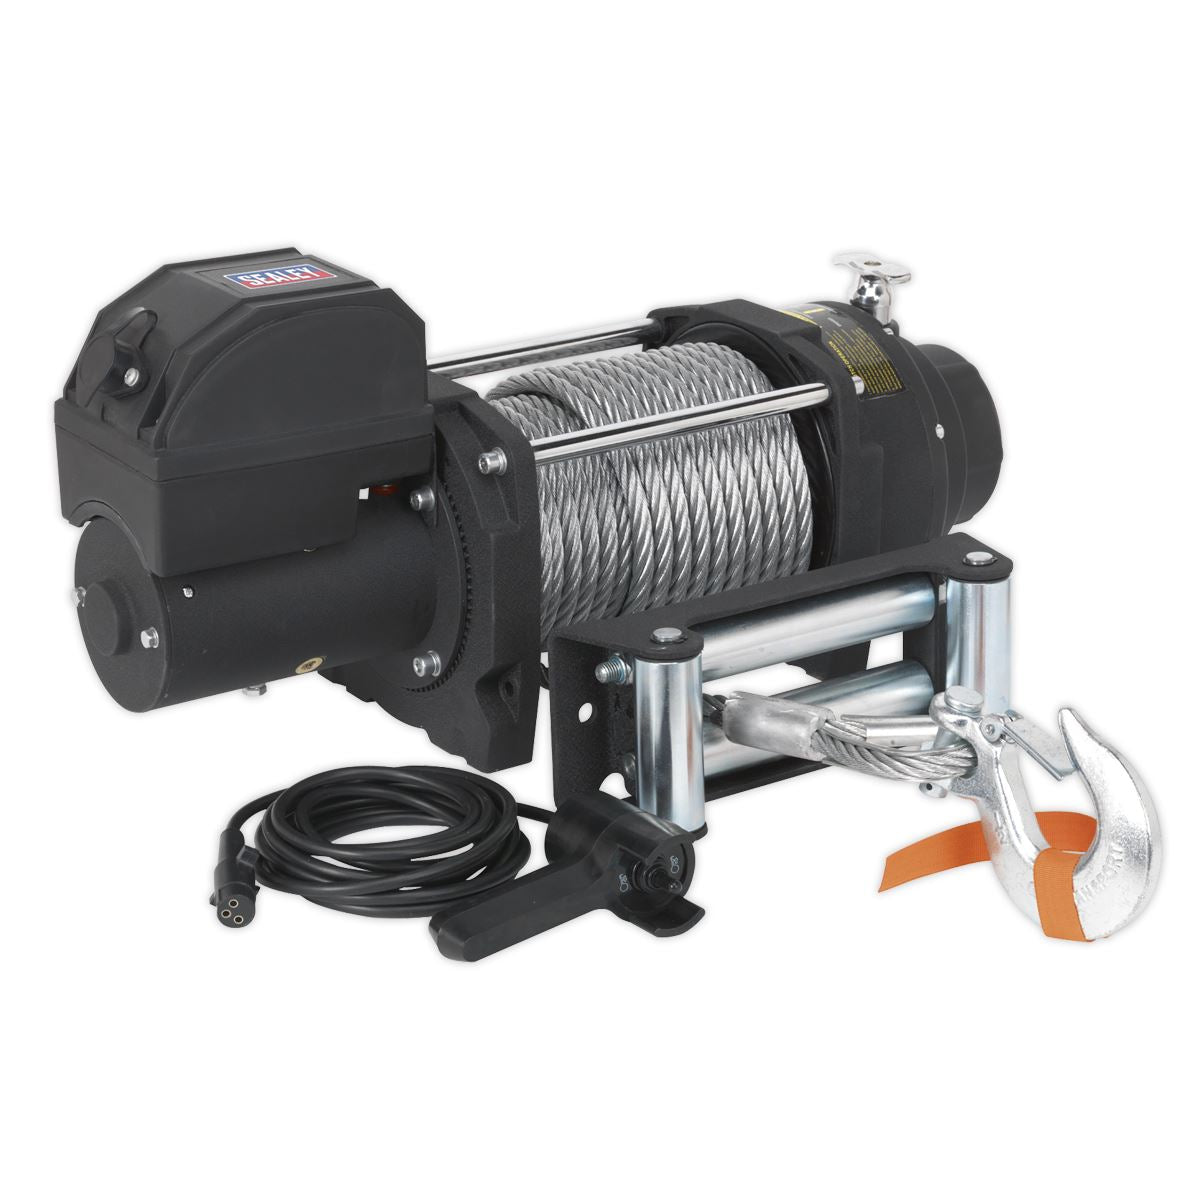 Sealey Premier Recovery Winch 8180kg(18000lb)Line Pull 12V Industrial